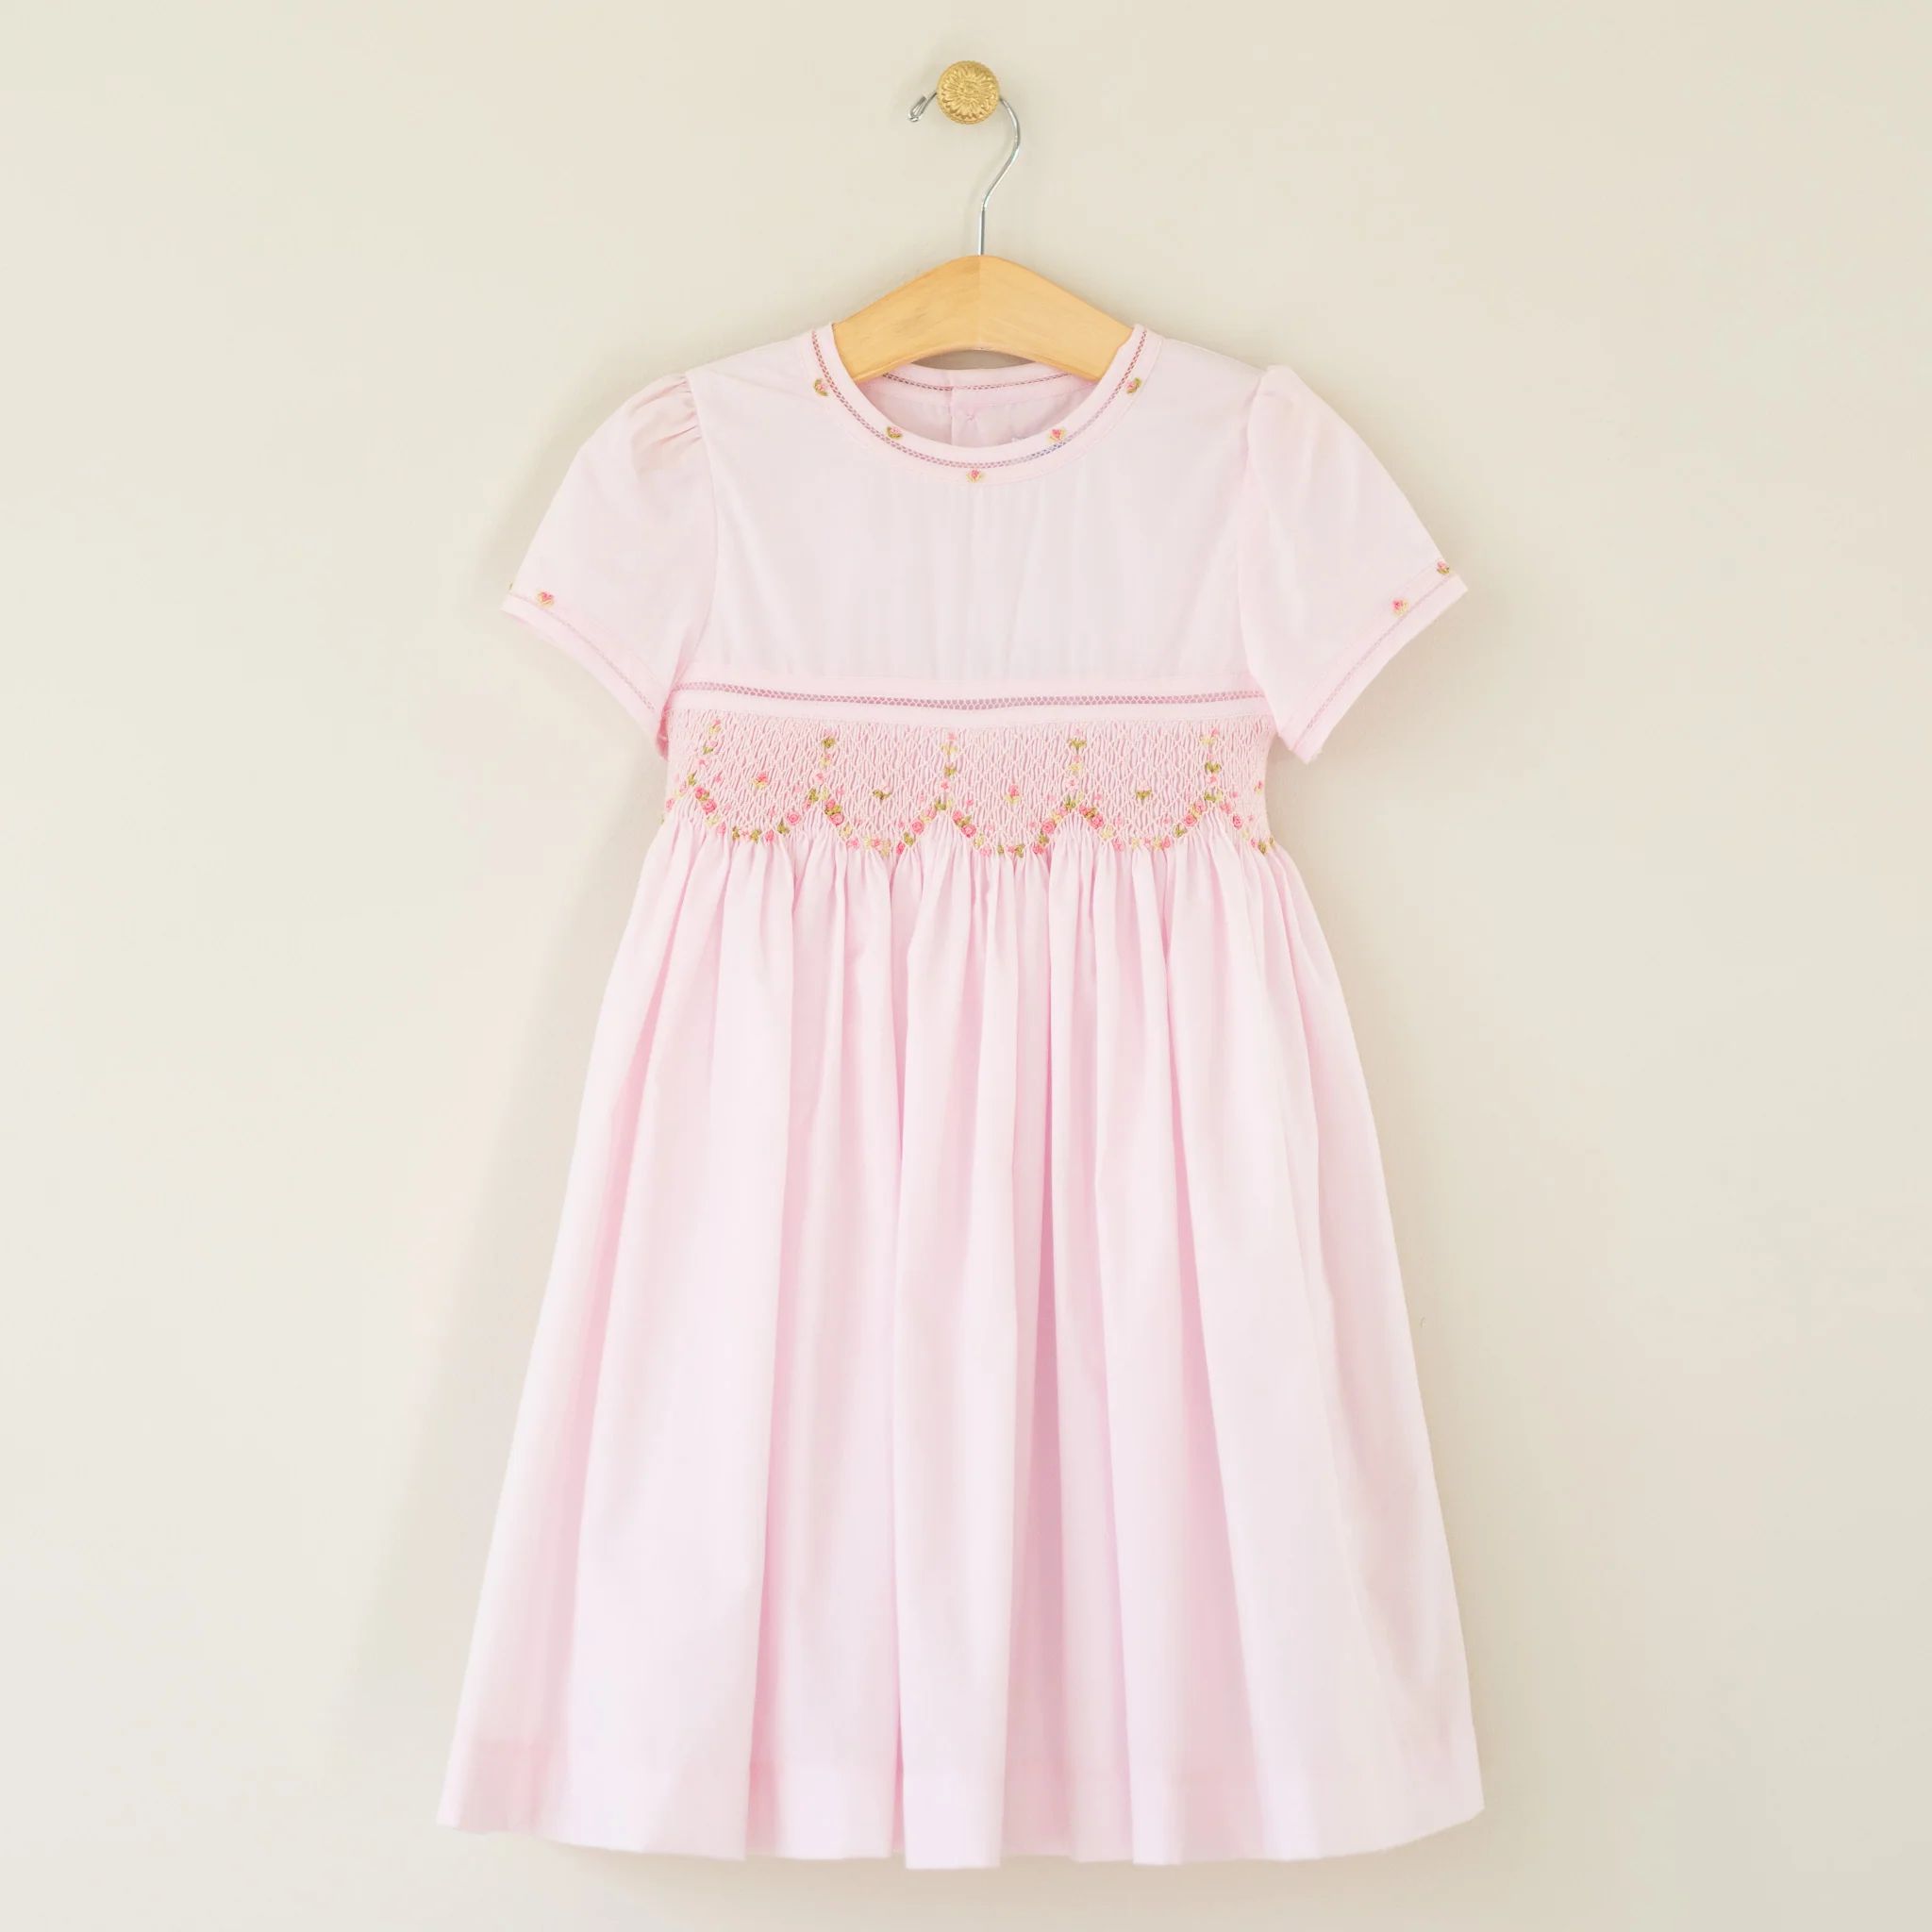 Solid Pink Smocked Dress | Four and Twenty Sailors